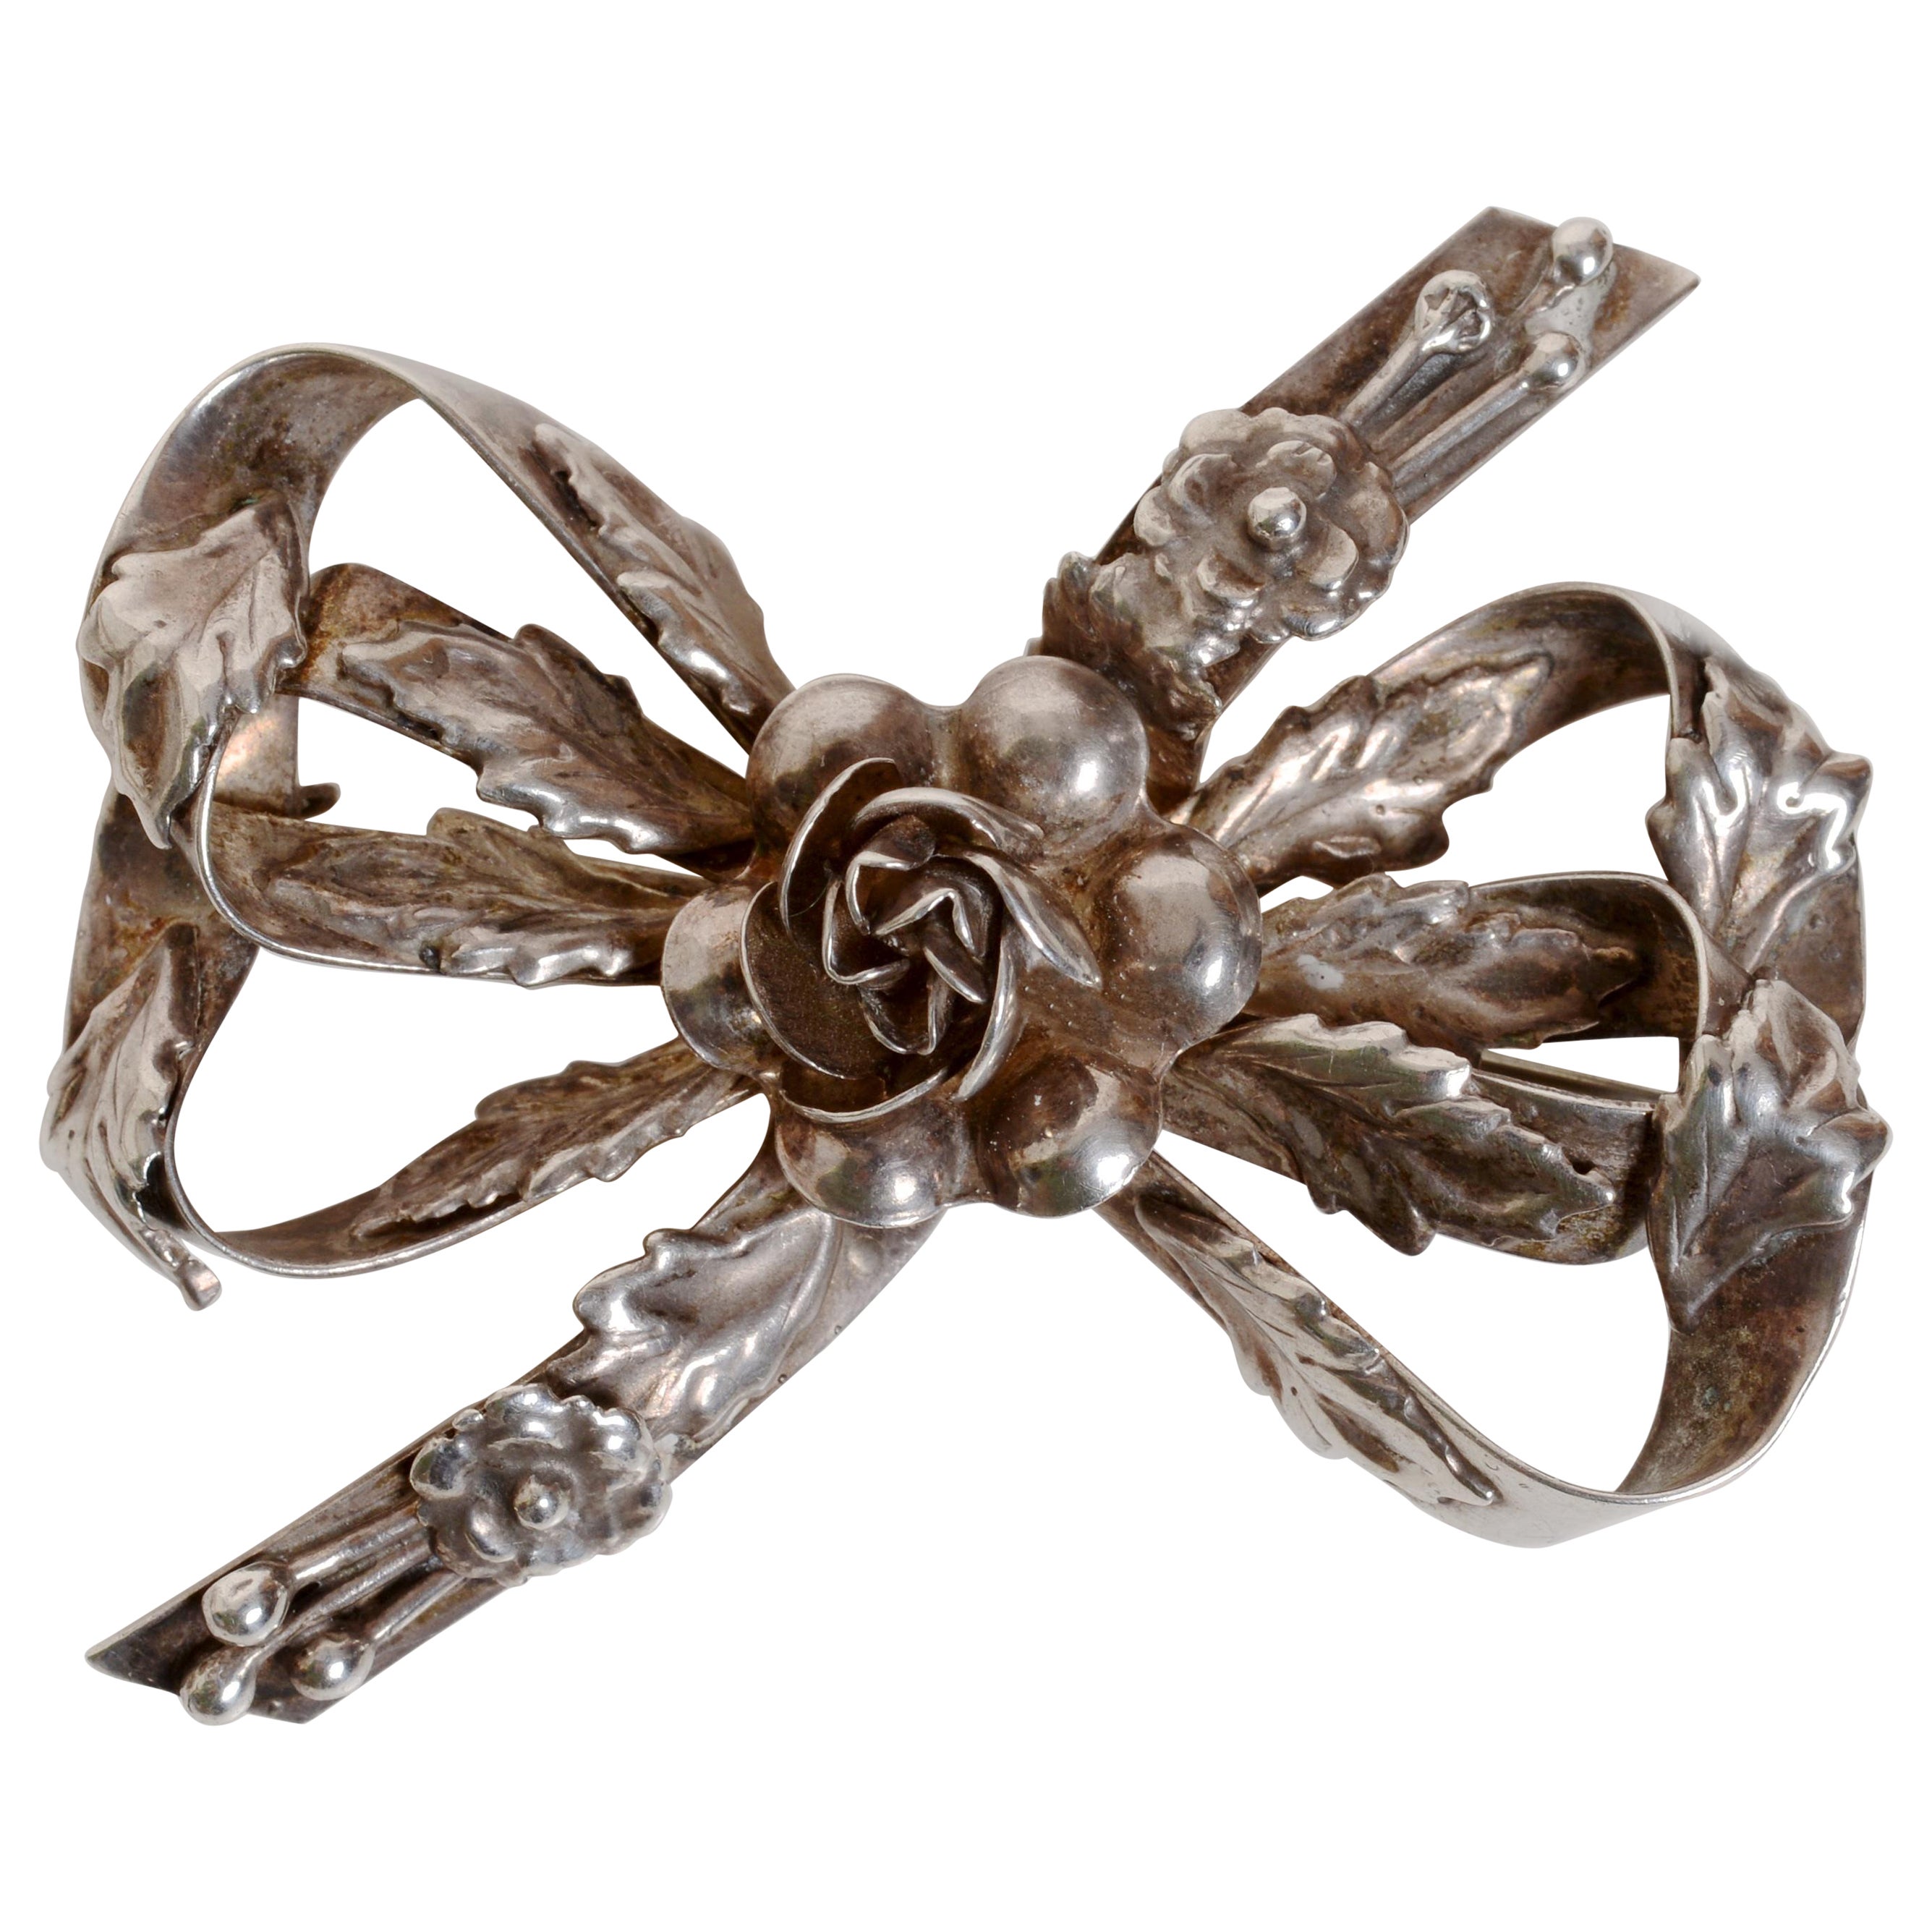   Classic Sterling Silver Brooch Ribbon and Flower Design, c1942, Signed Hobé For Sale